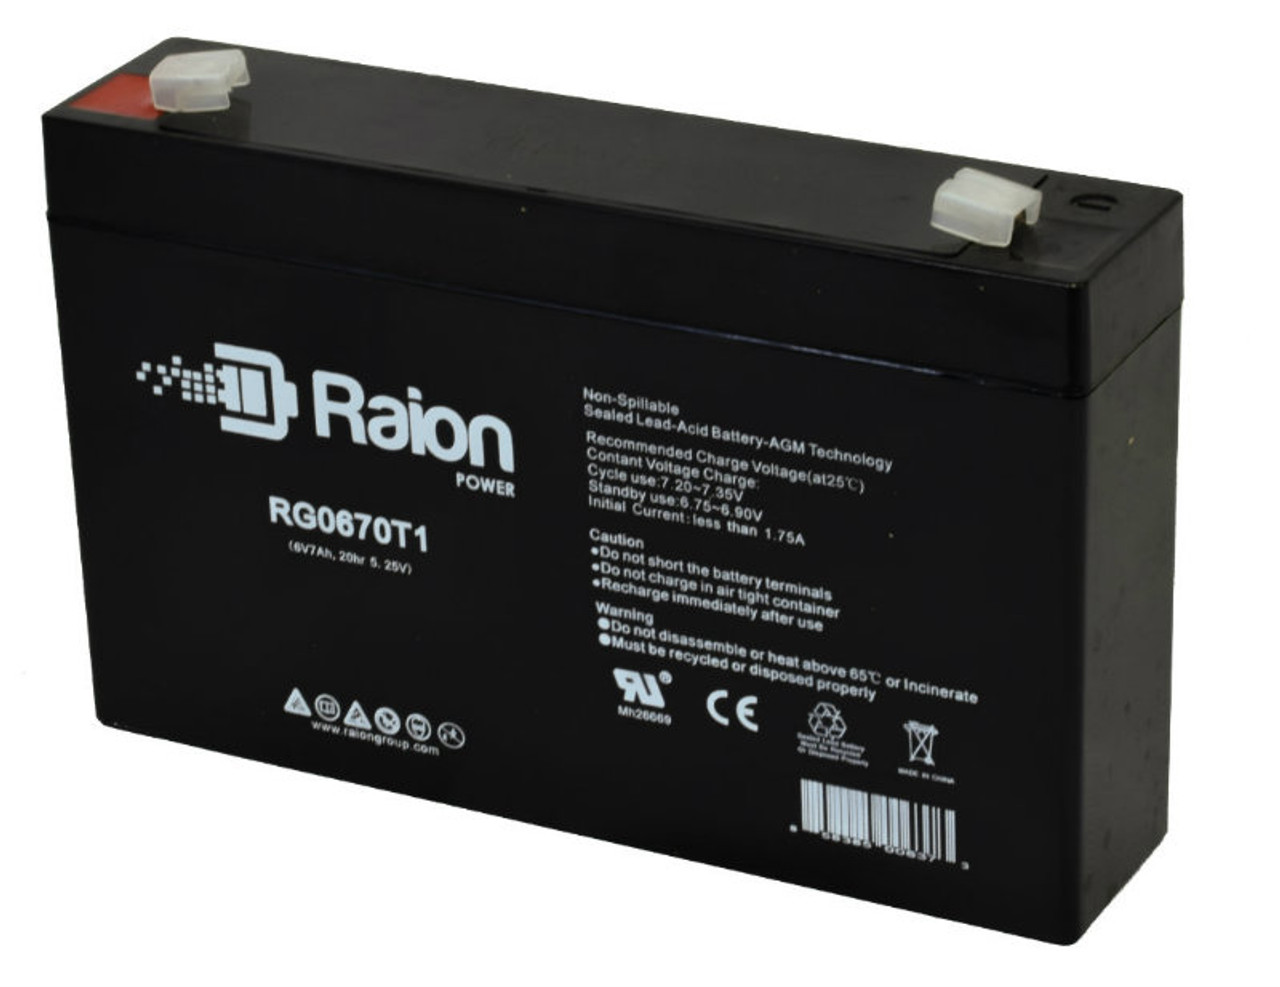 Raion Power RG0670T1 6V 7Ah Replacement Emergency Lighting Battery for Hubbell 12-826